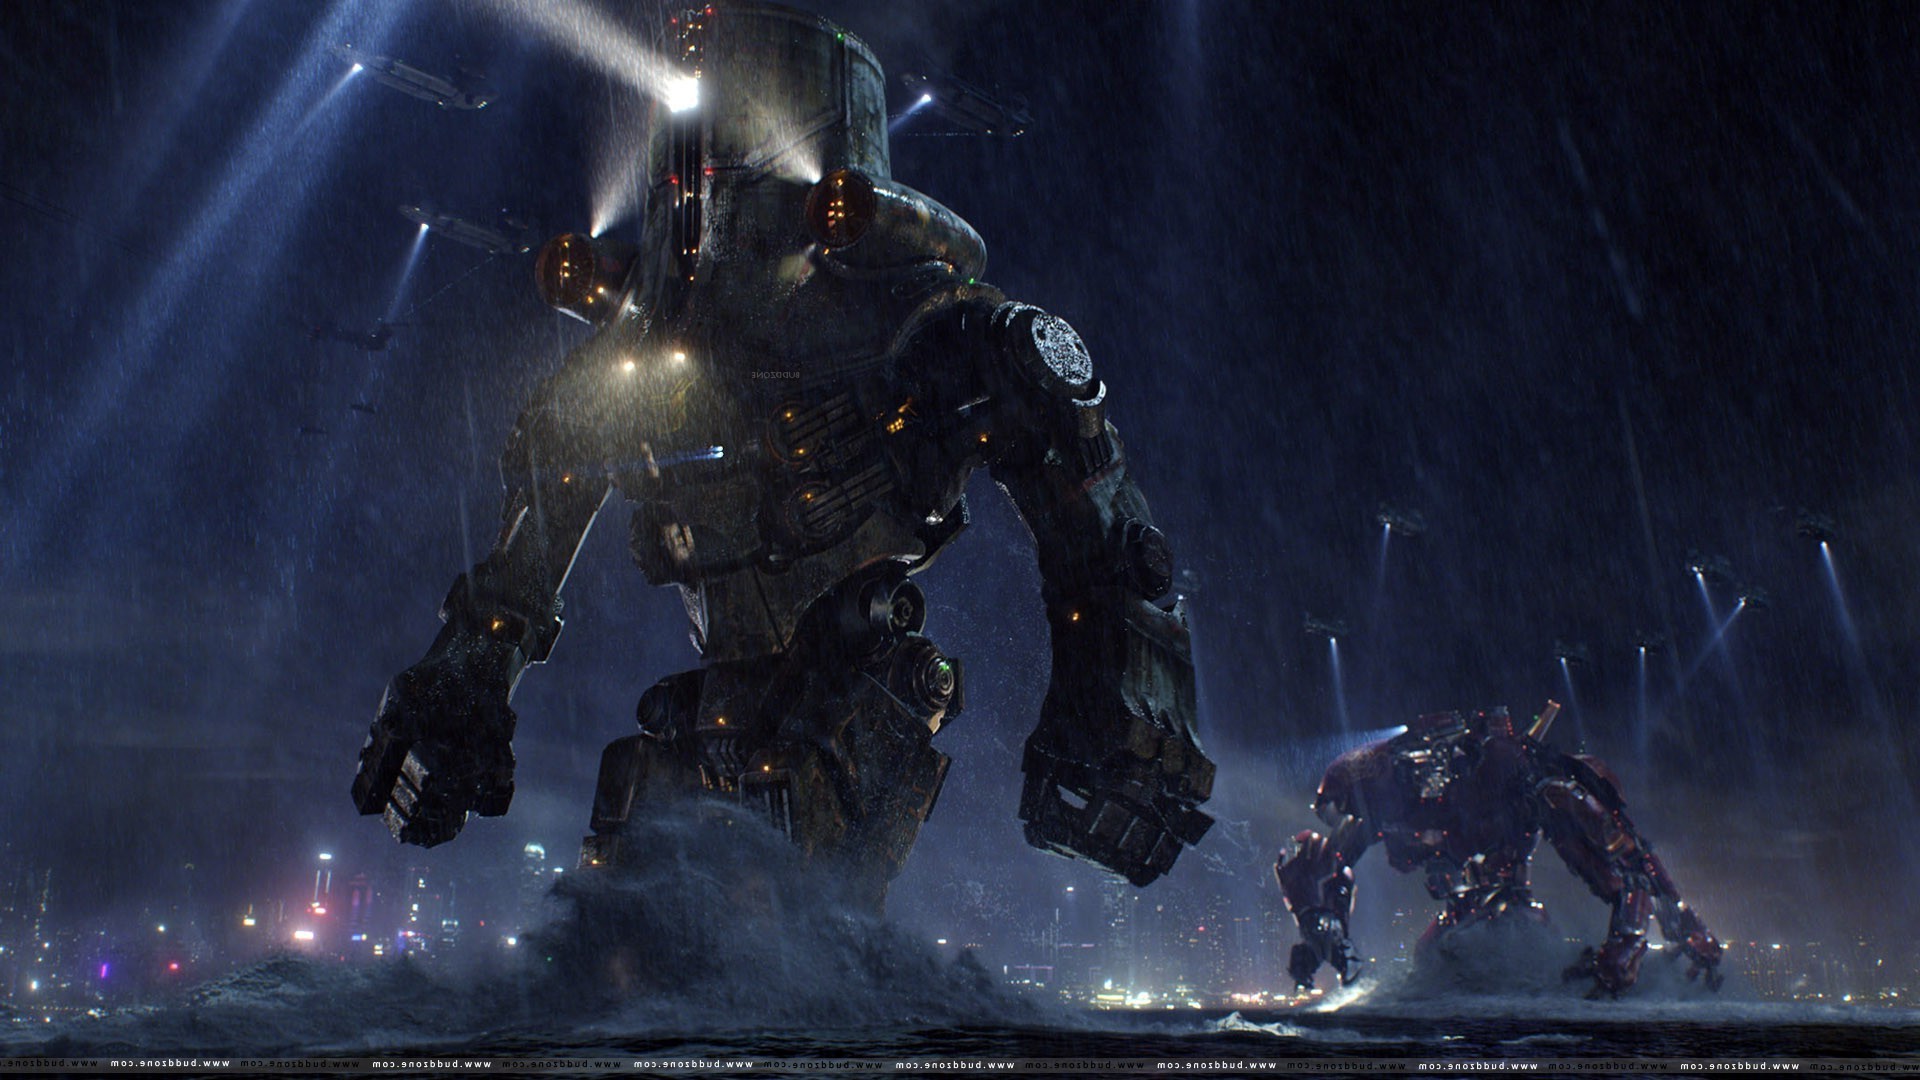 pacific rim movies wallpapers hd desktop and mobile backgrounds pacific rim movies wallpapers hd